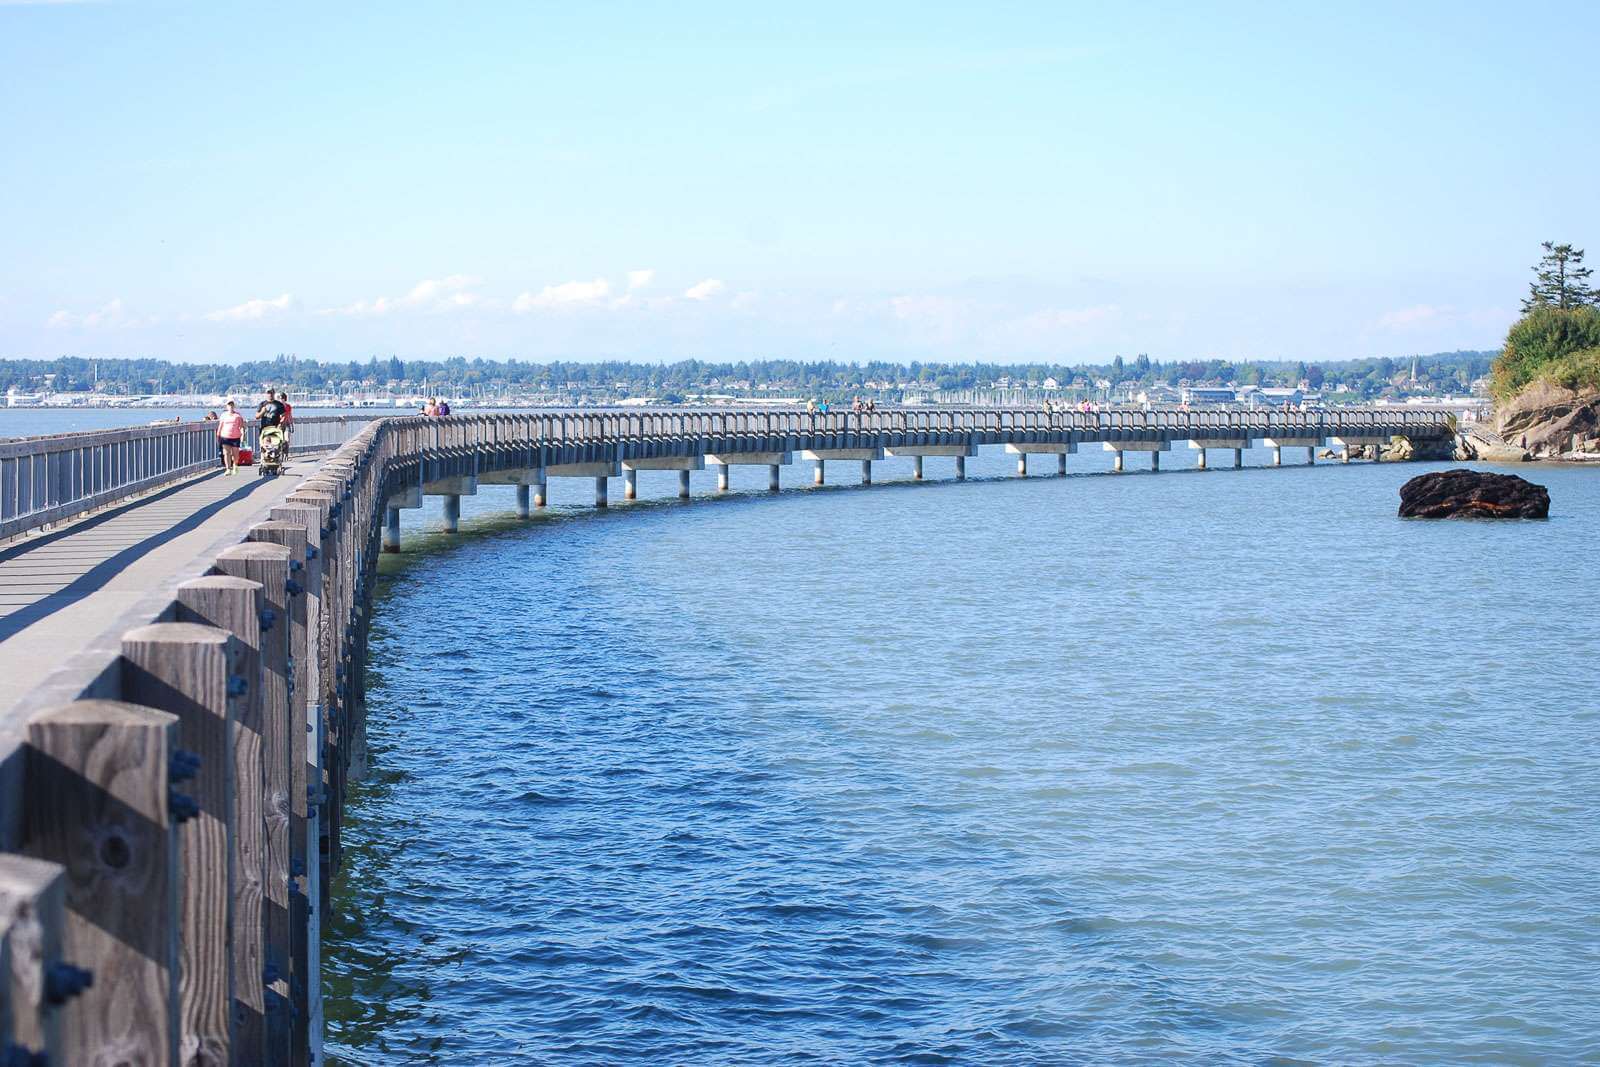 People walk along a wooden and concrete boardwalk that extends over the water in Bellingham